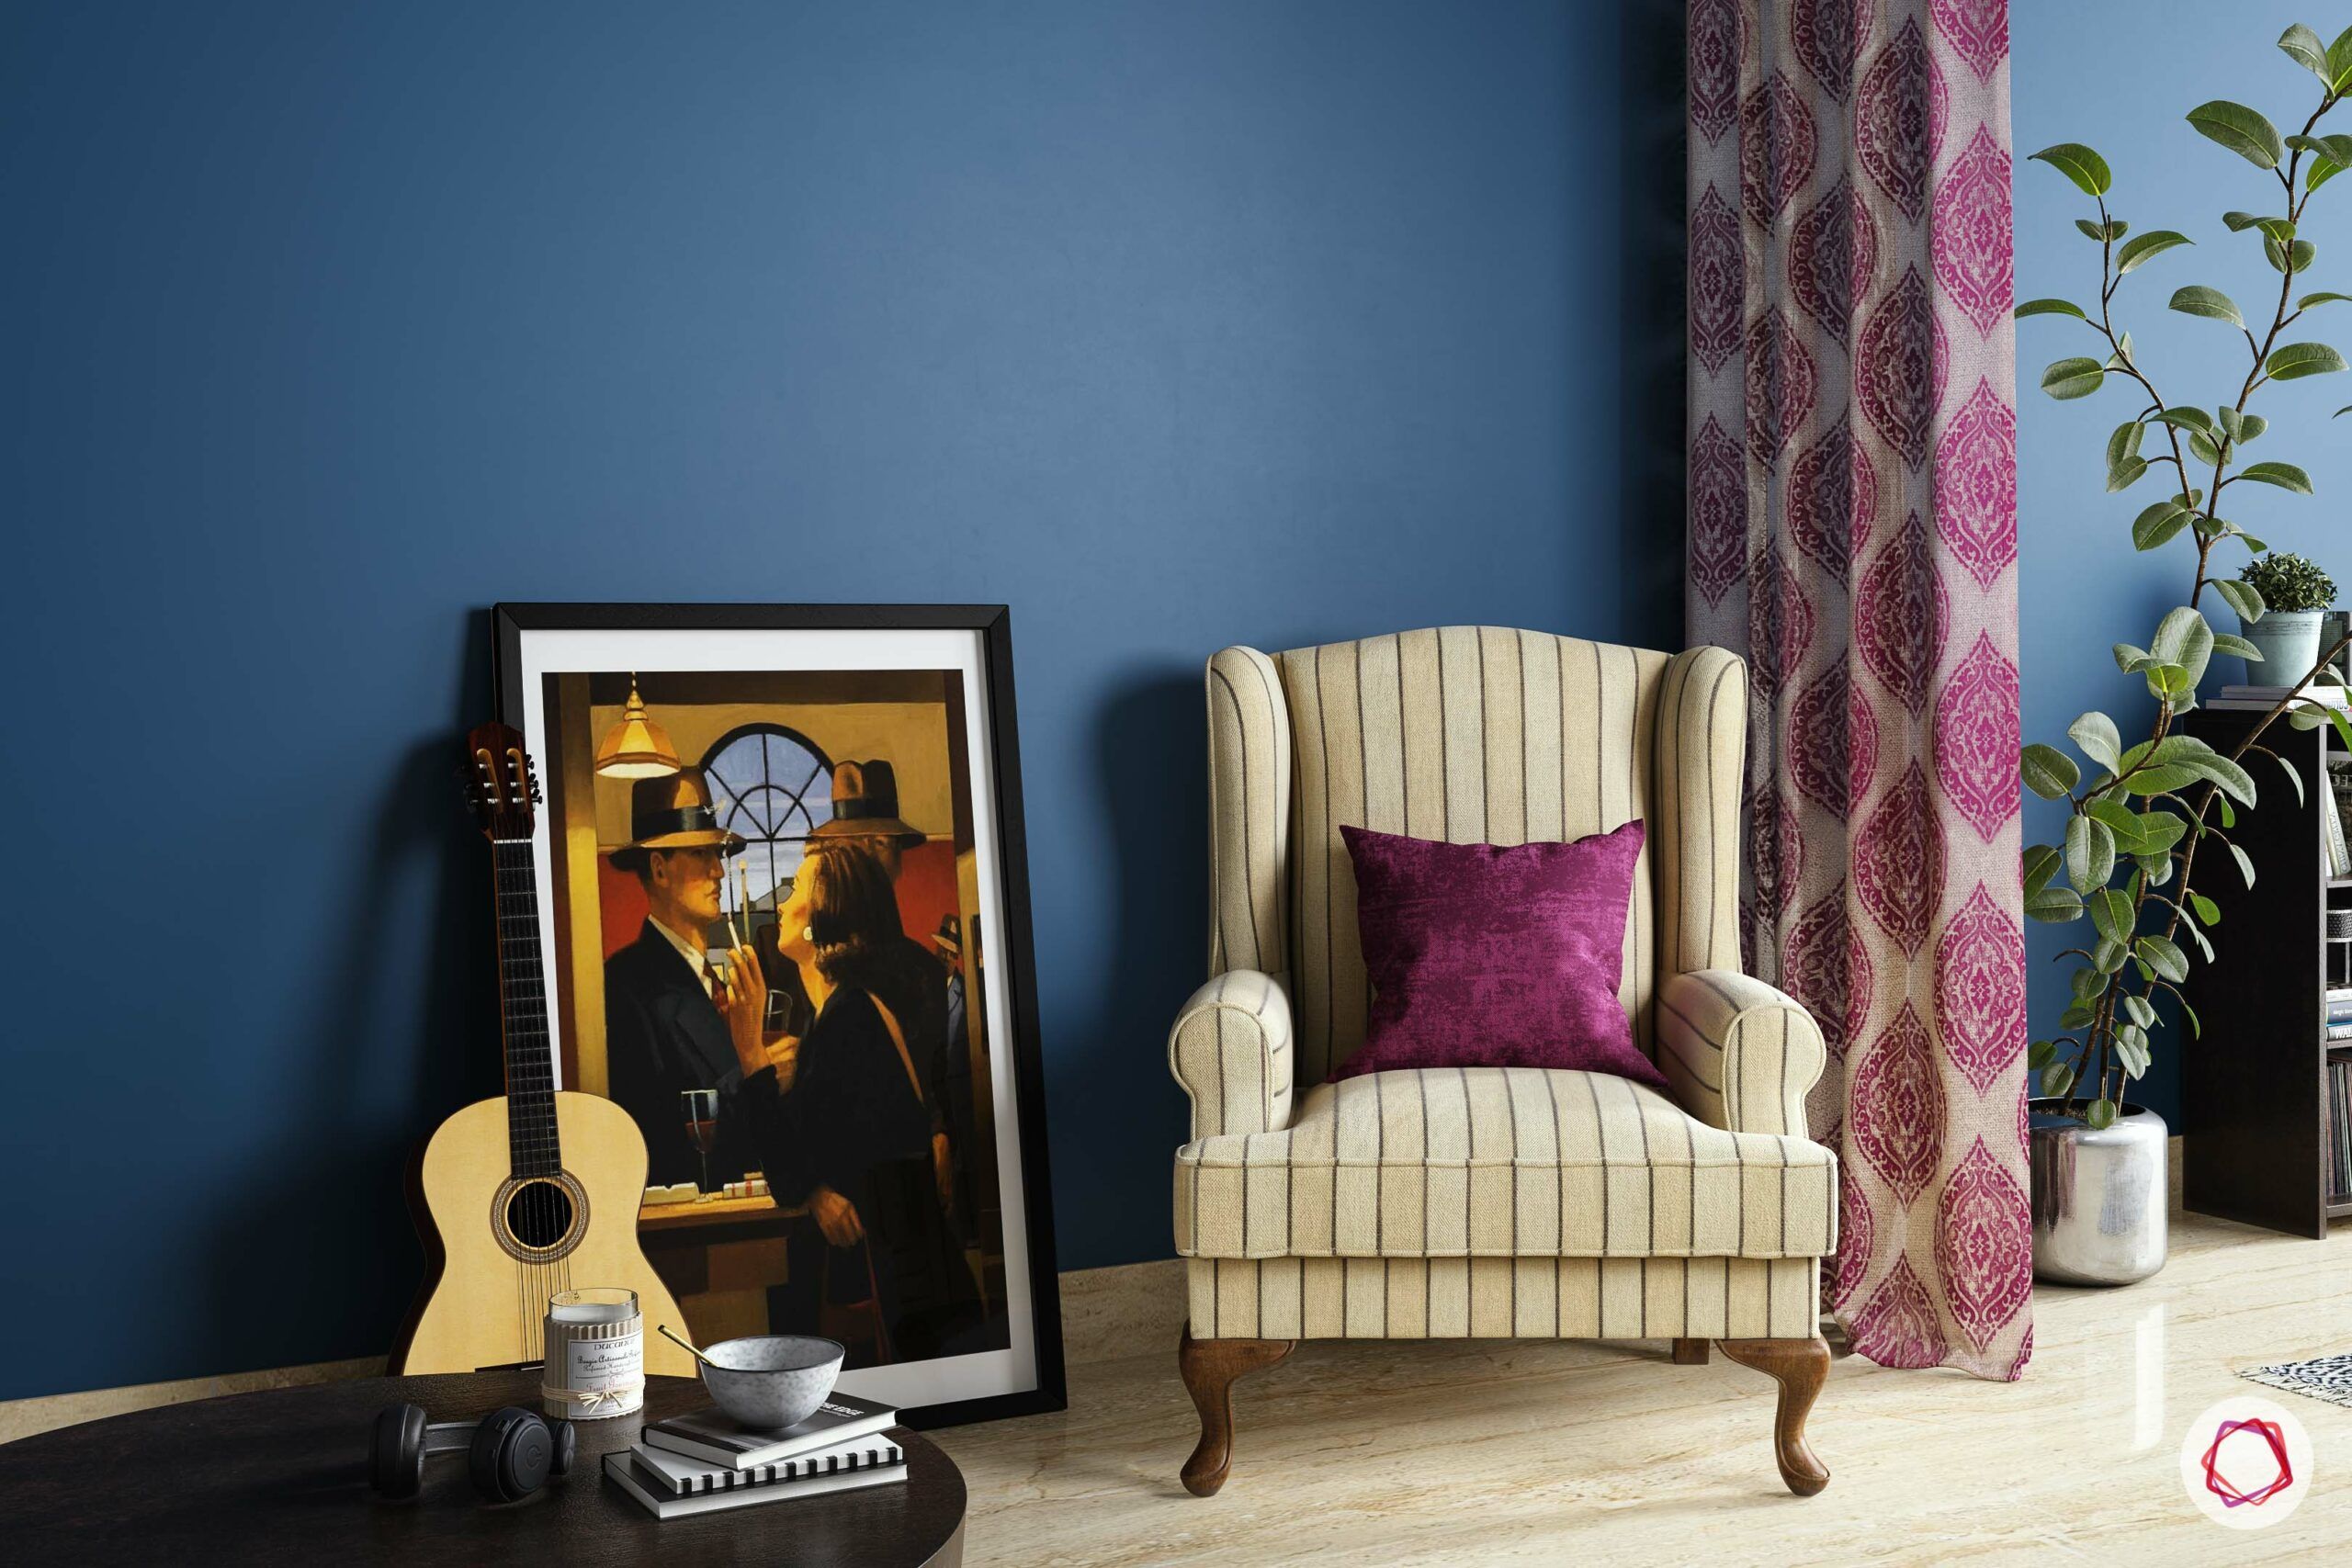 types-of-chairs-armchair-beige-stripped-blue-wall-painting